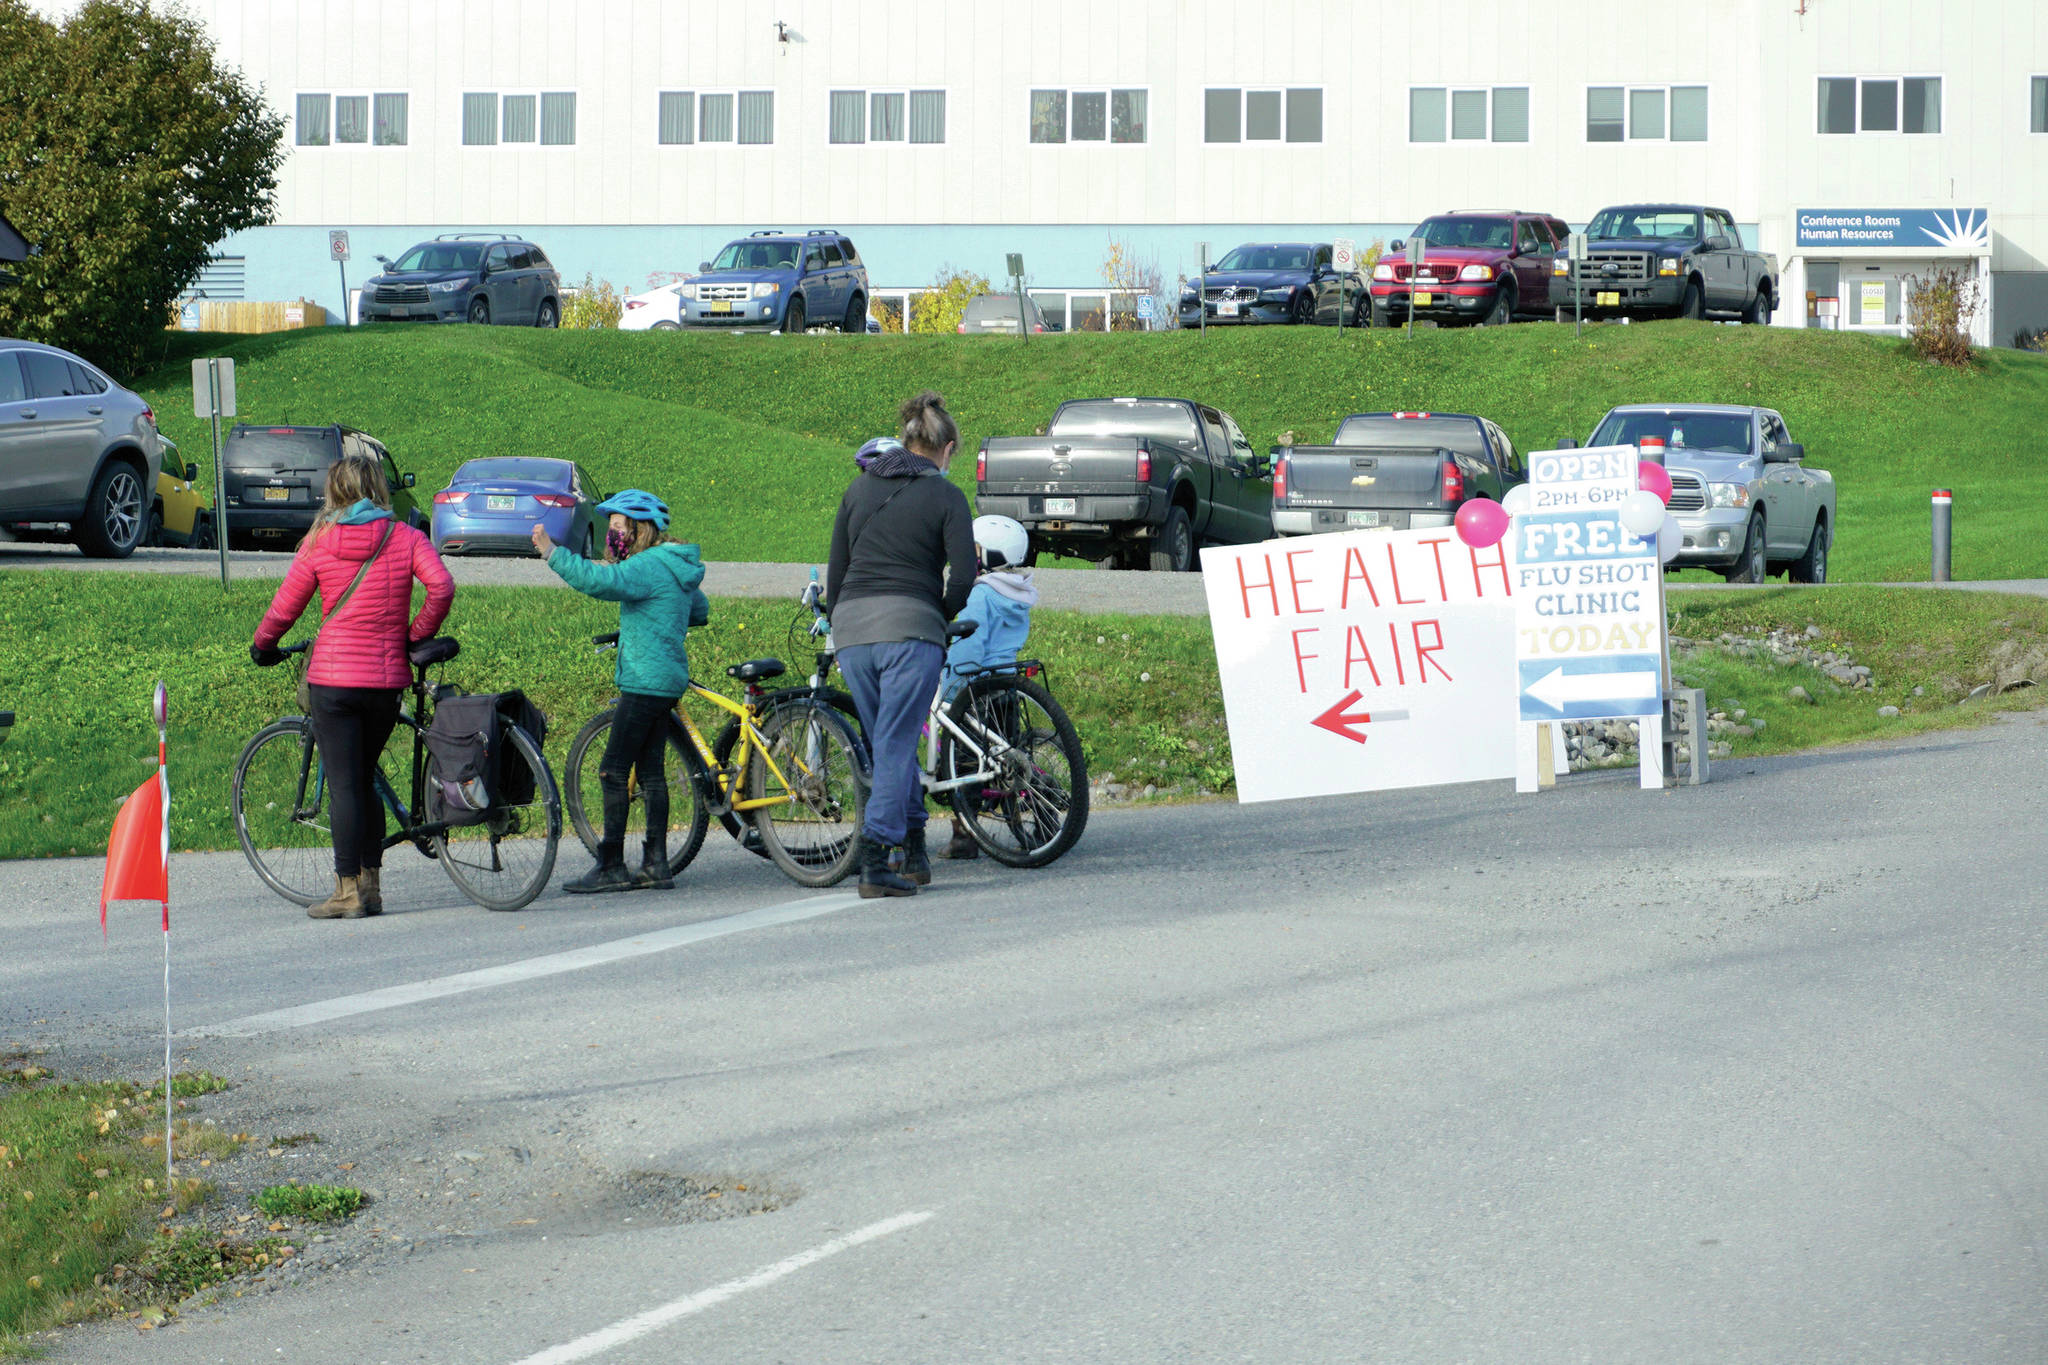 A group of women and children on bikes wait their turn to get flu shots at a clinic held last Friday, Oct. 16, 2020, at the South Peninsula Family Care Clinic in Homer, Alaska. About 330 free flu shots were administed on Oct. 16 and 17 at the clinic. Another free flu clinic is 4-7 p.m. Tuesday, Oct. 27, at the Homer United Methodist Church, administered by SVT Health & Wellness as part of the Rotary Health Fair. (PHoto by Michael Armstrong/Homer News)